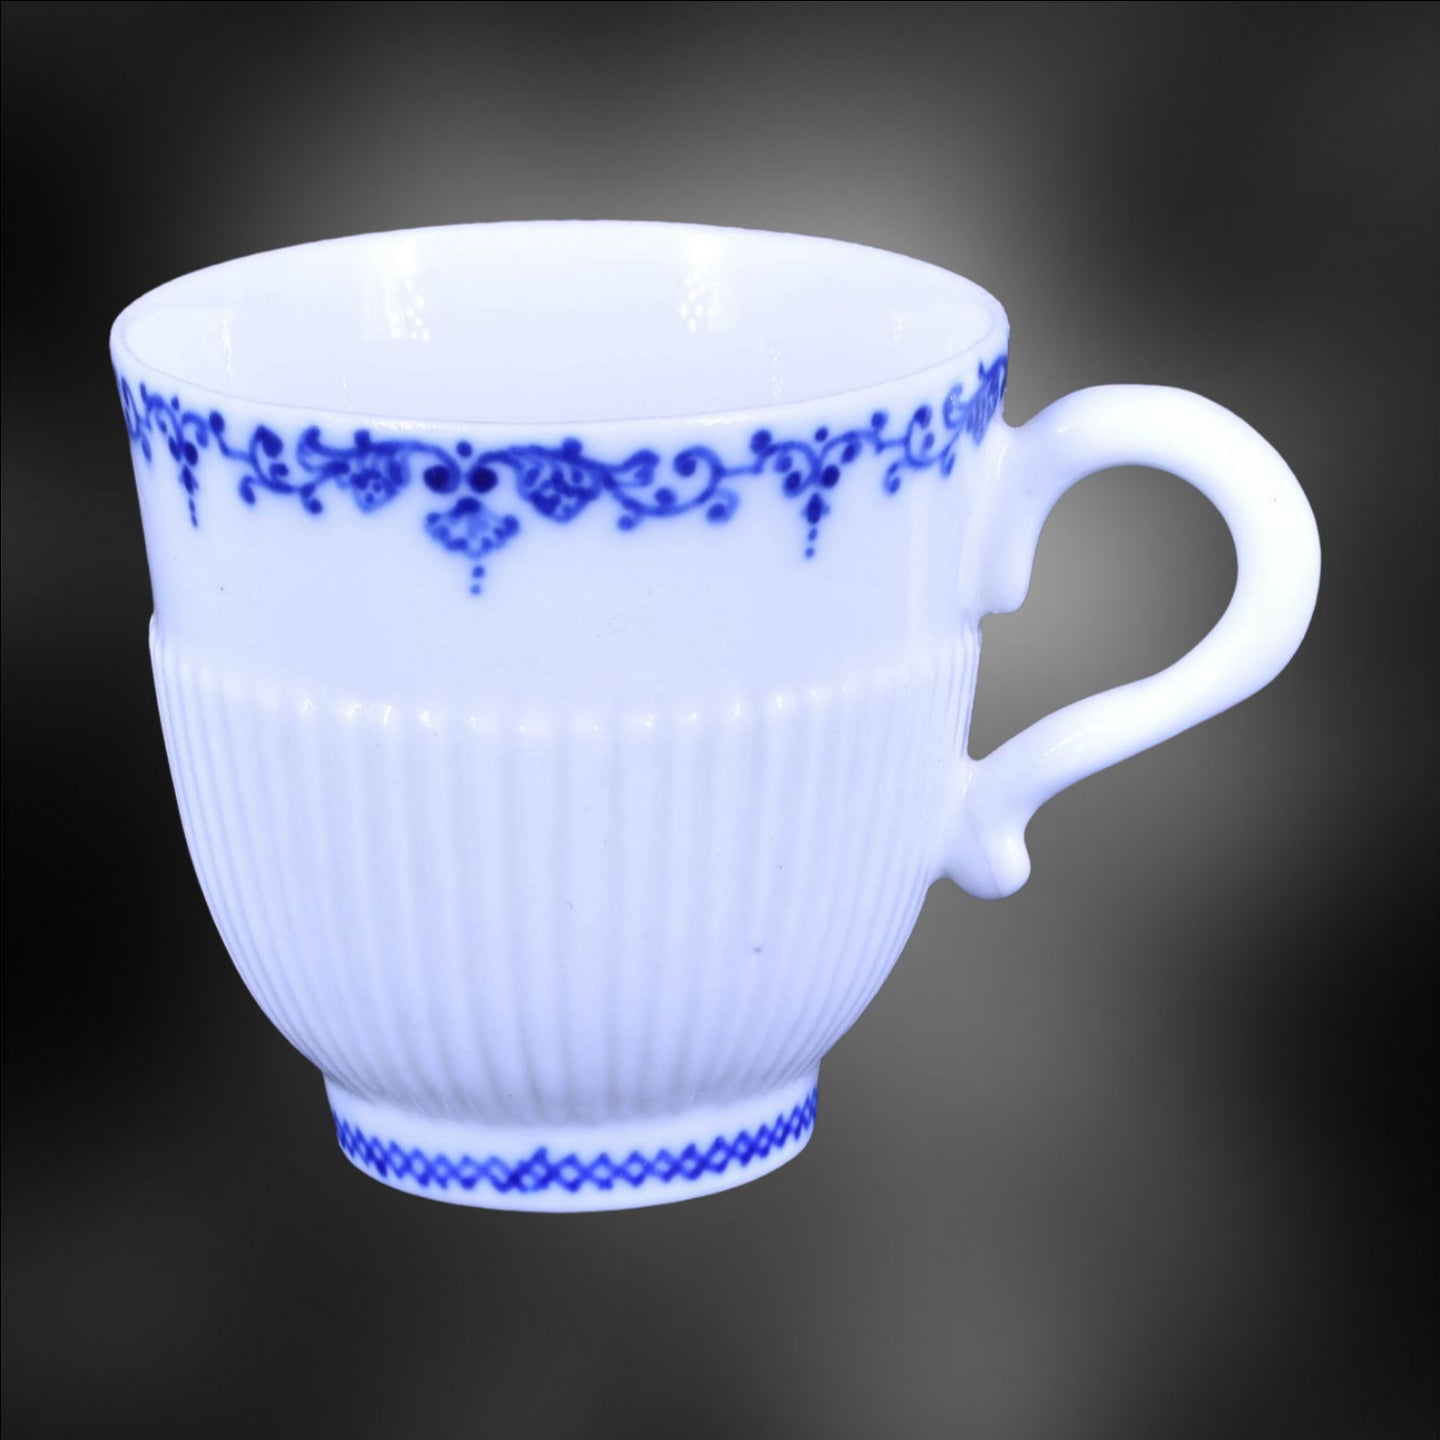 Cup and Saucer, Blue and White